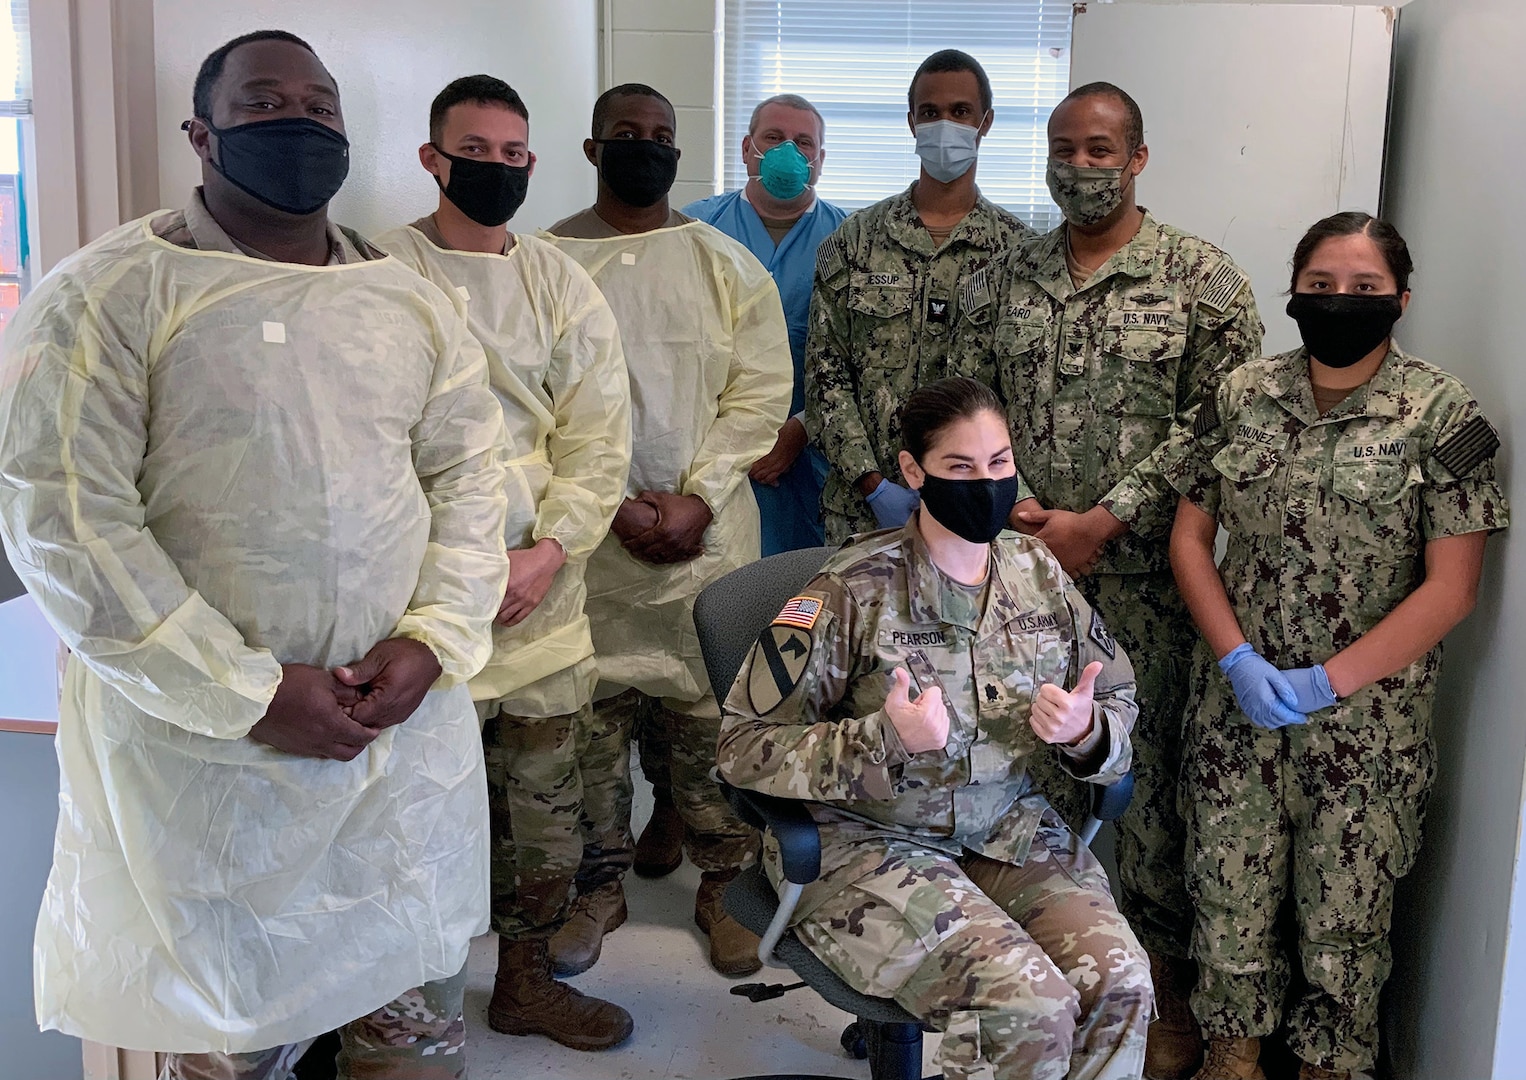 Lt. Col. Nadia M Pearson, U.S. Army Medical Center of Excellence command surgeon (seated) poses for a group photo with members of the Holiday Block Leave Team Reintegration Testing Cell.